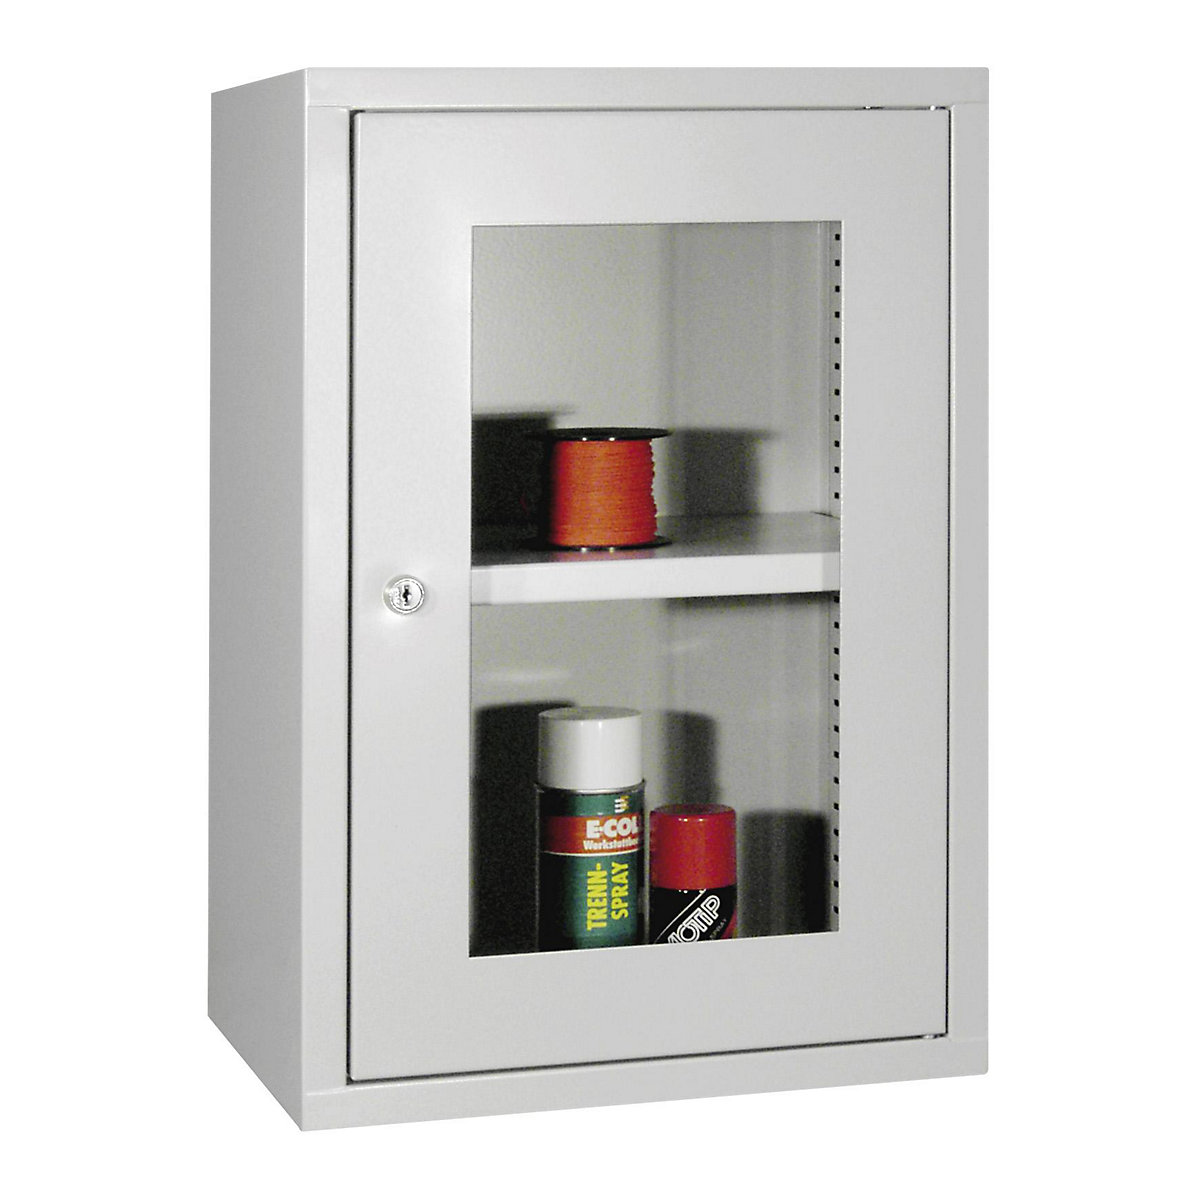 Wall mounted cupboard, height 600 mm – Pavoy